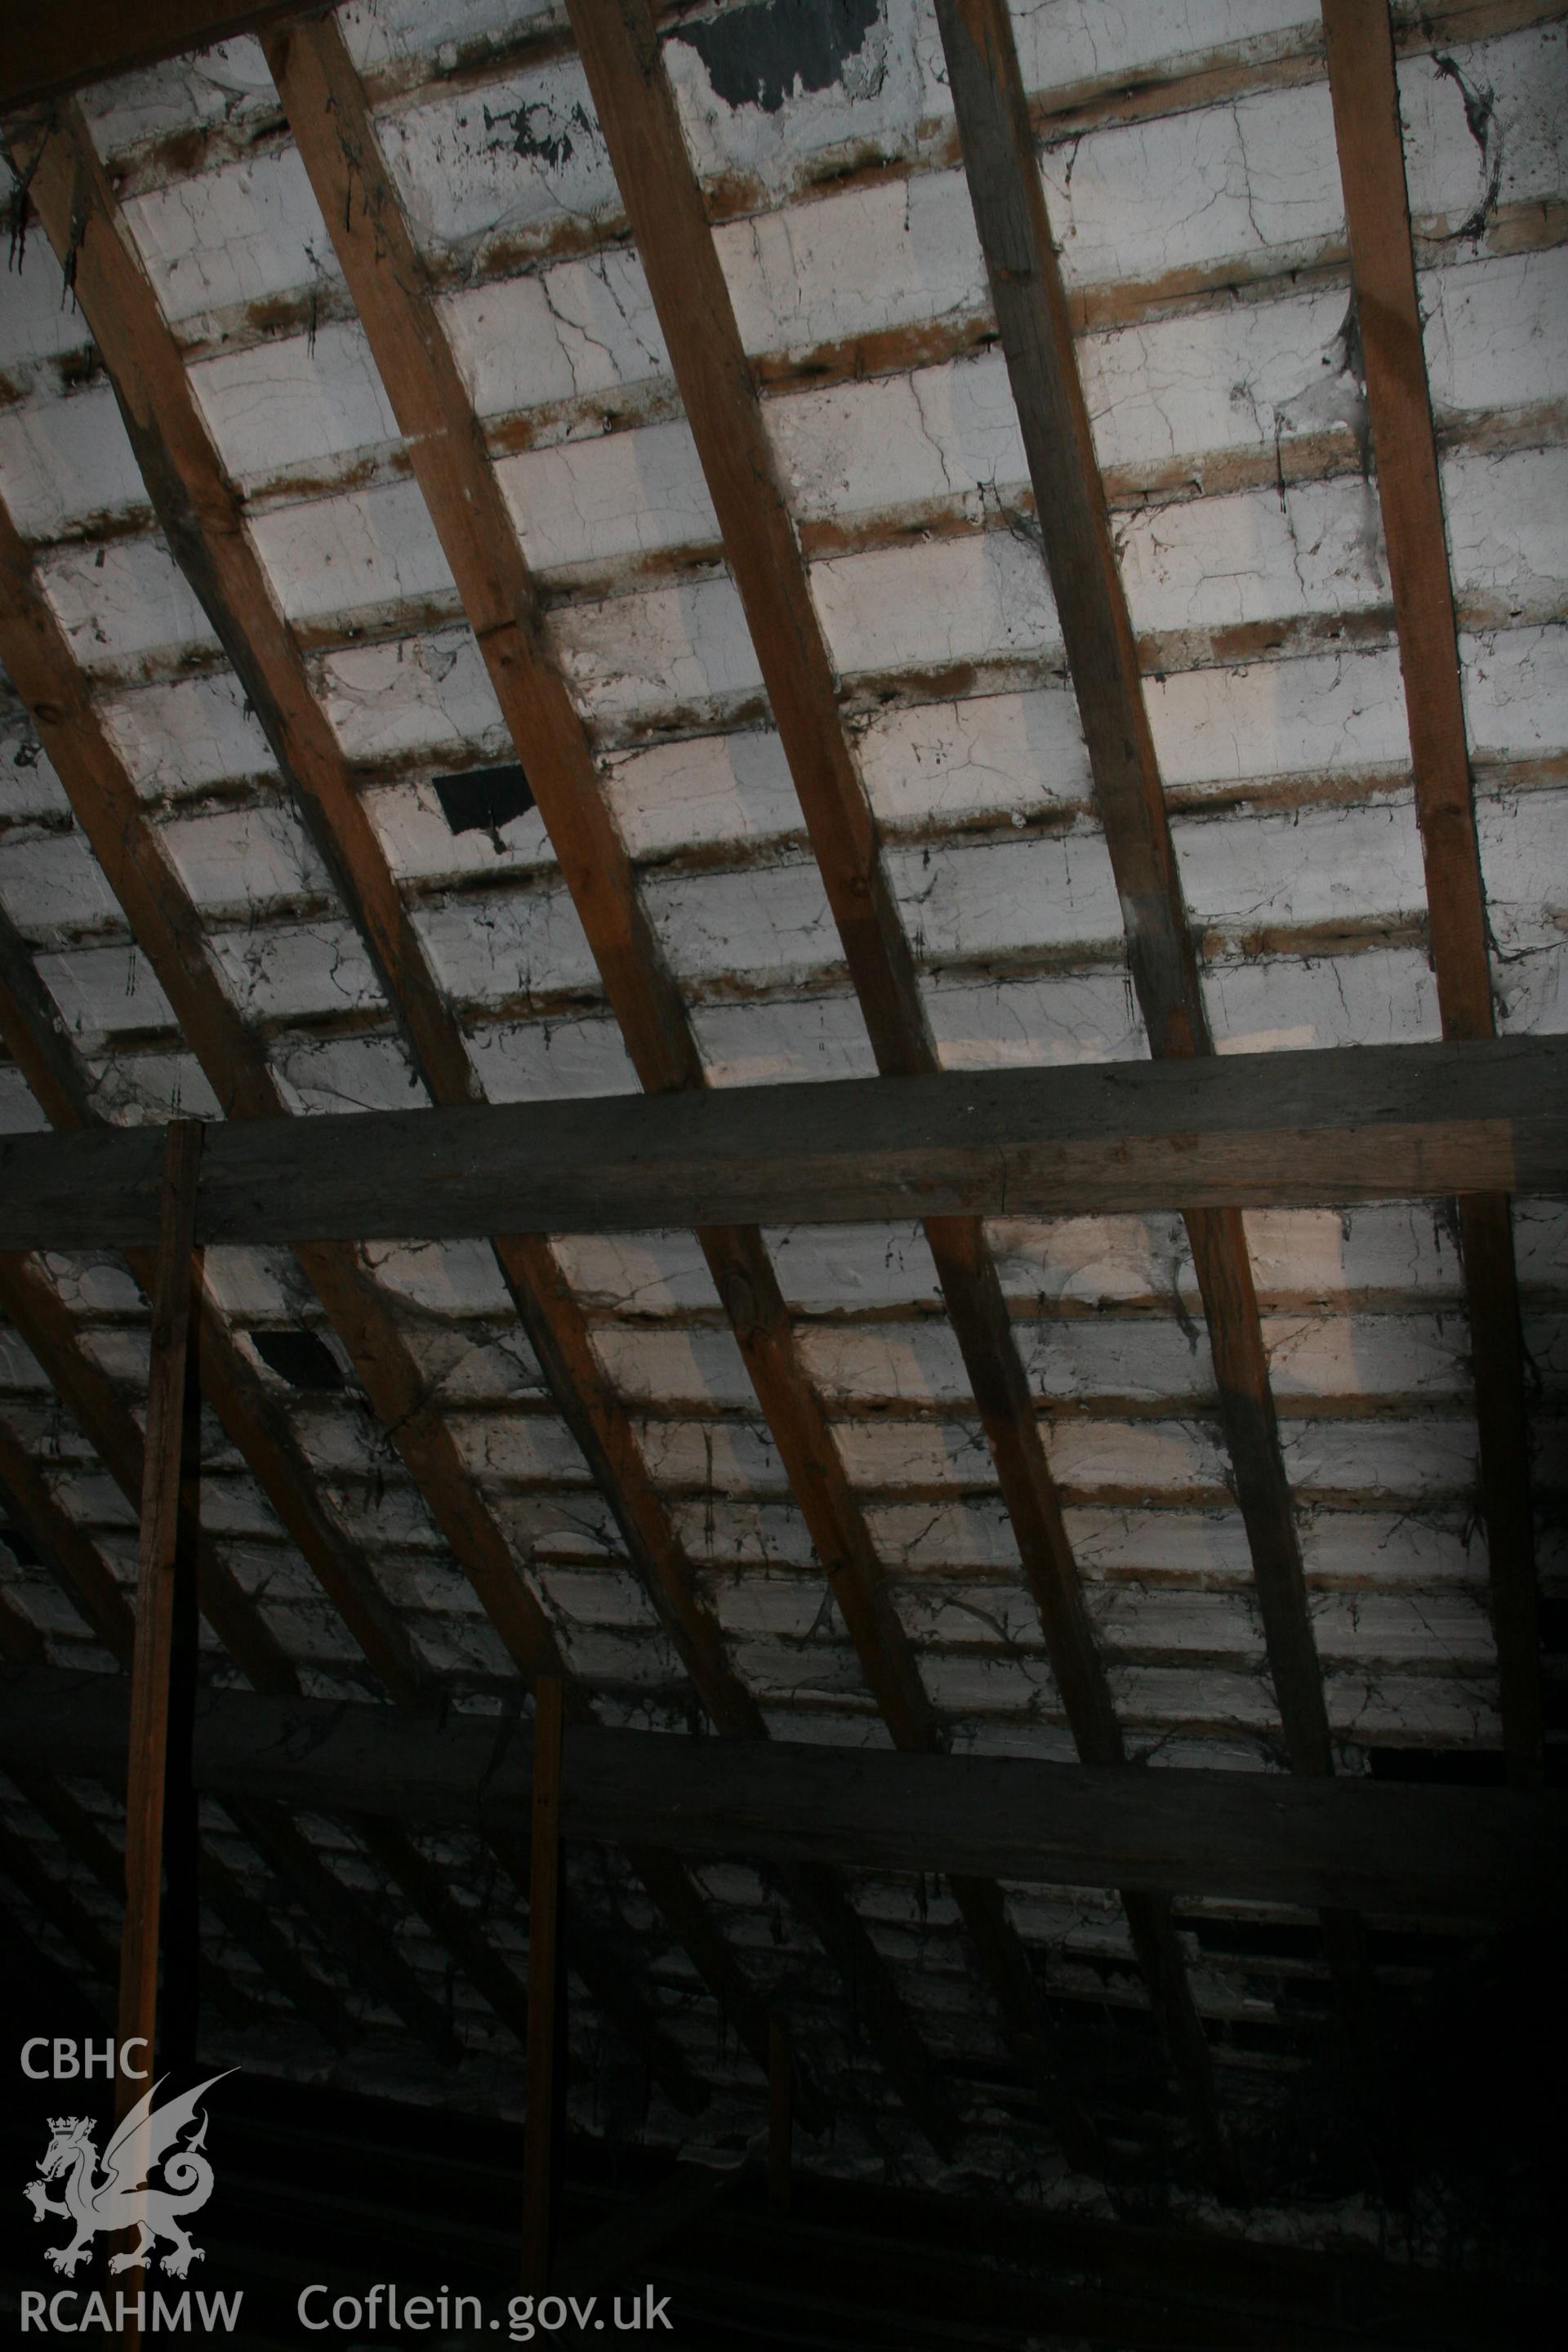 Photograph showing detailed interior view of wooden beams and roof of the former Llawrybettws Welsh Calvinistic Methodist chapel, Glanyrafon, Corwen. Produced by Tim Allen on 27th February 2019 to meet a condition attached to planning application.